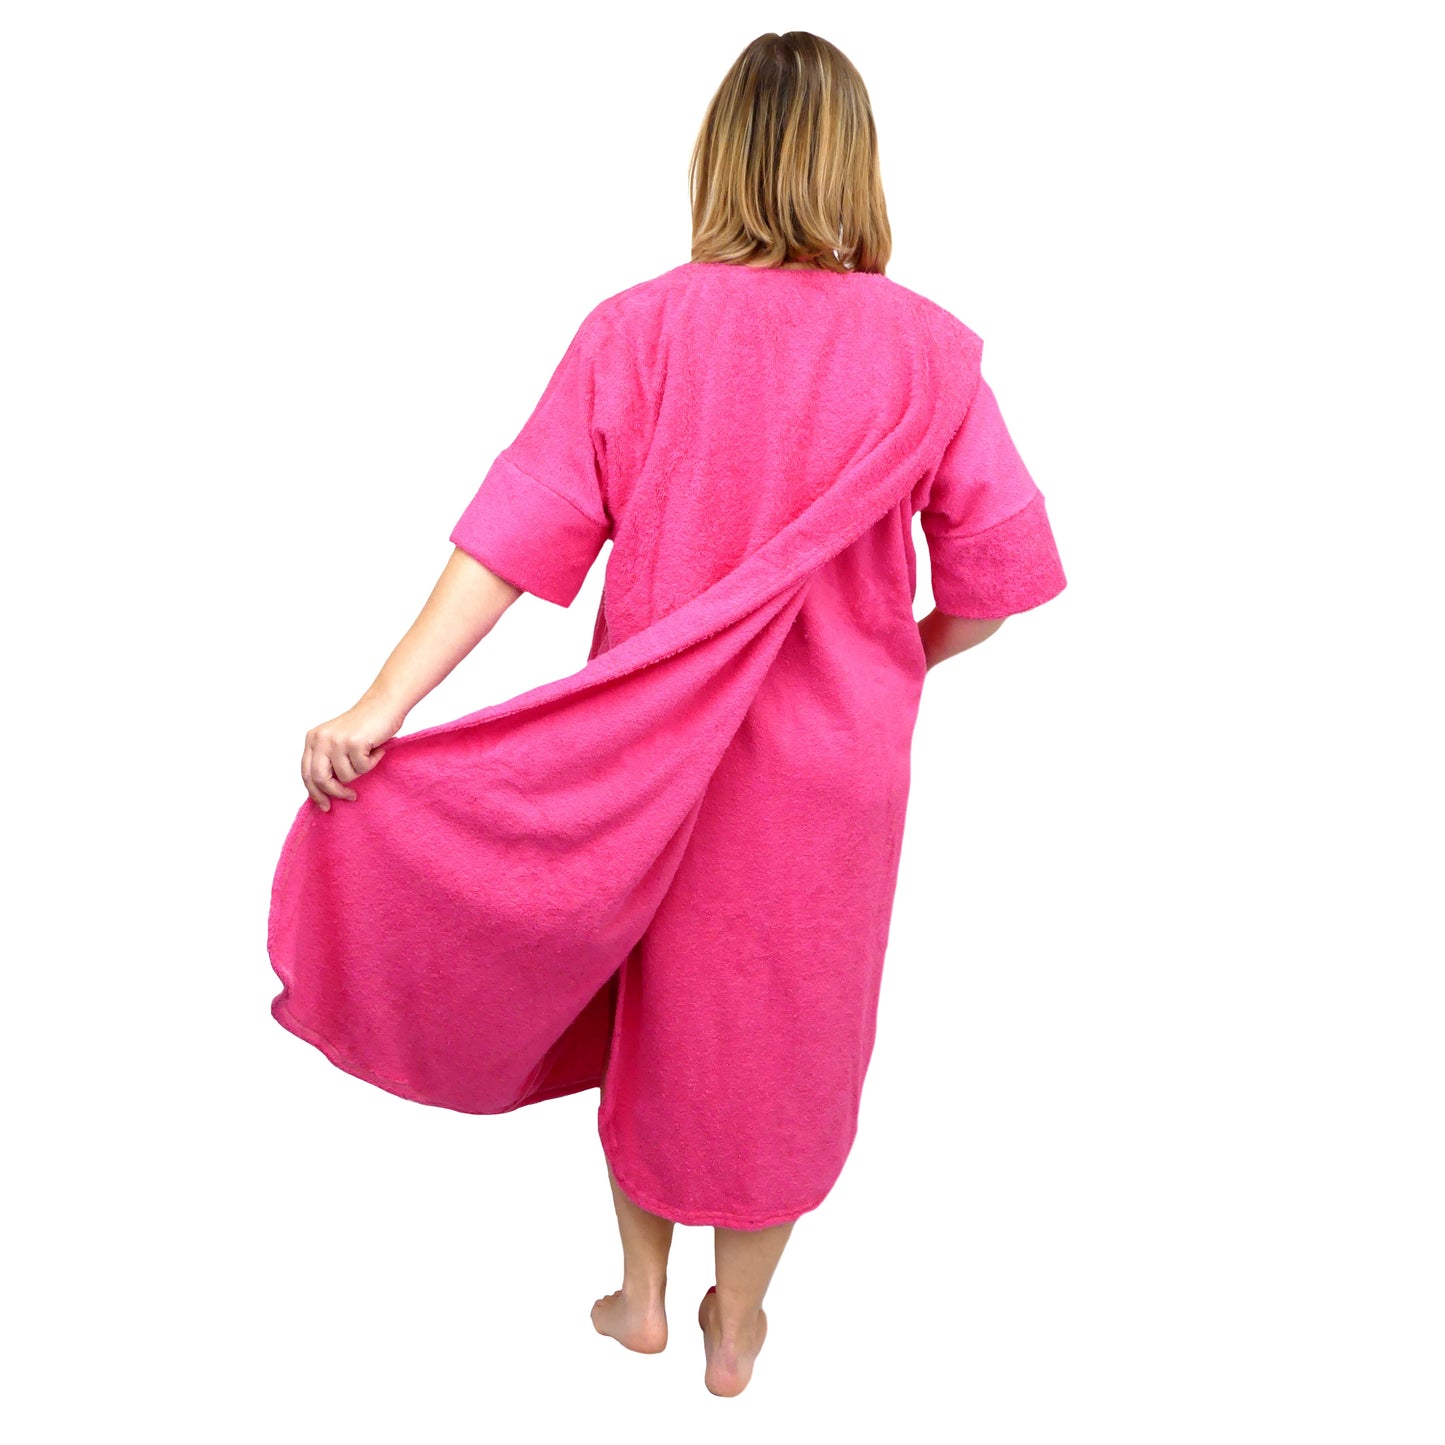 Unisex Adaptive Clothing: Complete Open Back Dri-Me Towelling Shower Robe - M176